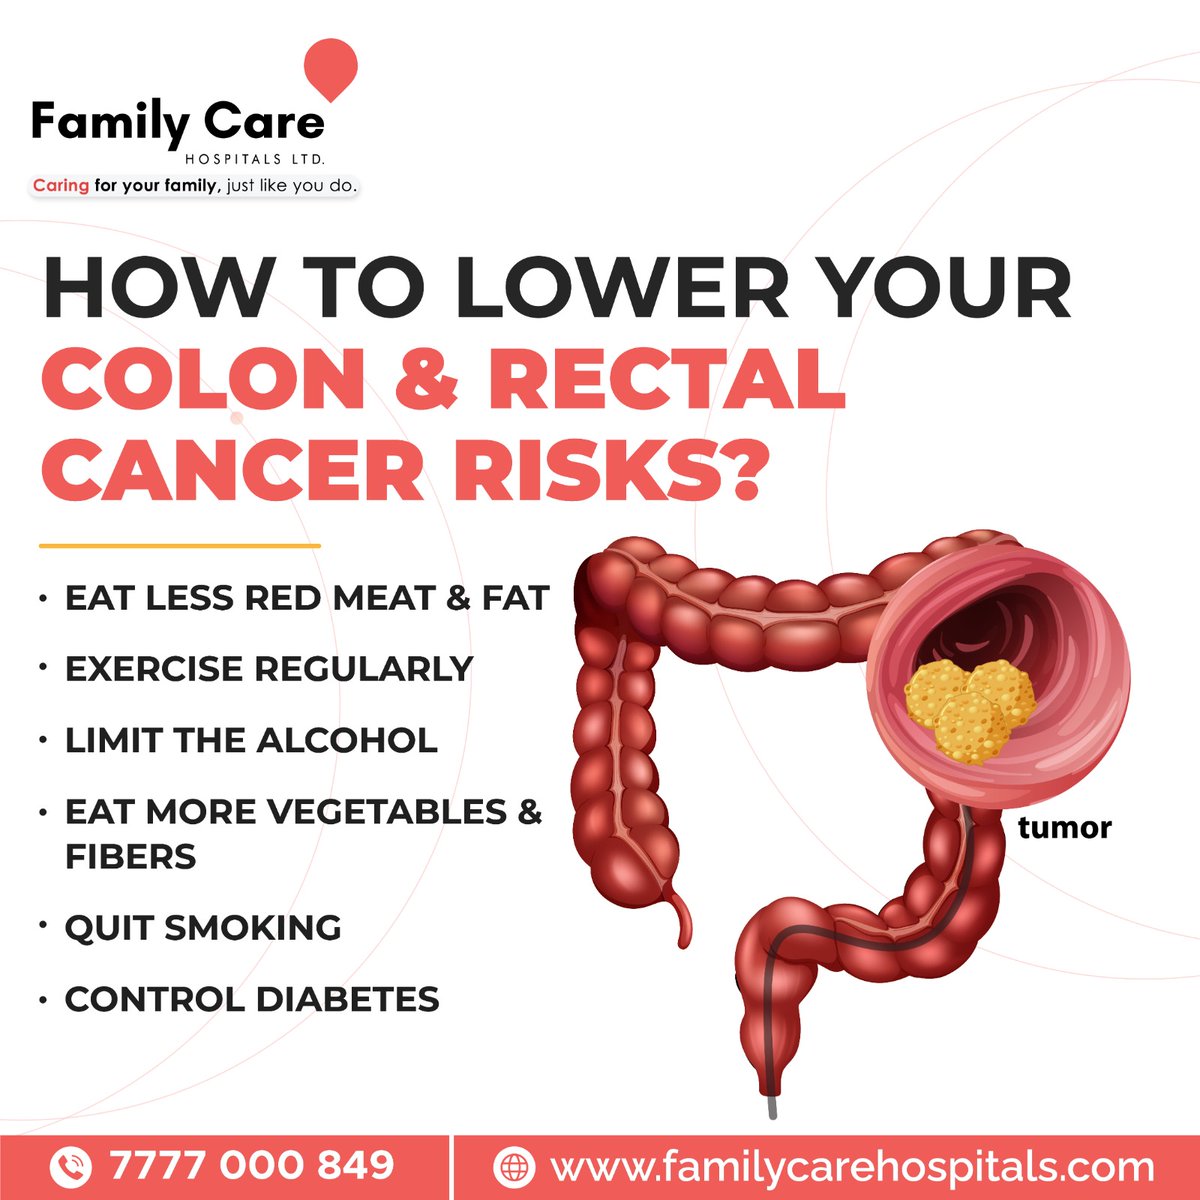 Colorectal cancer is the second leading cause of cancer-related deaths but this can be prevented through regular screenings, a healthy diet and regular exercise.

#FCH #Familycare #FamilyCareHospitals #Colorectalcancer #colon #cancer